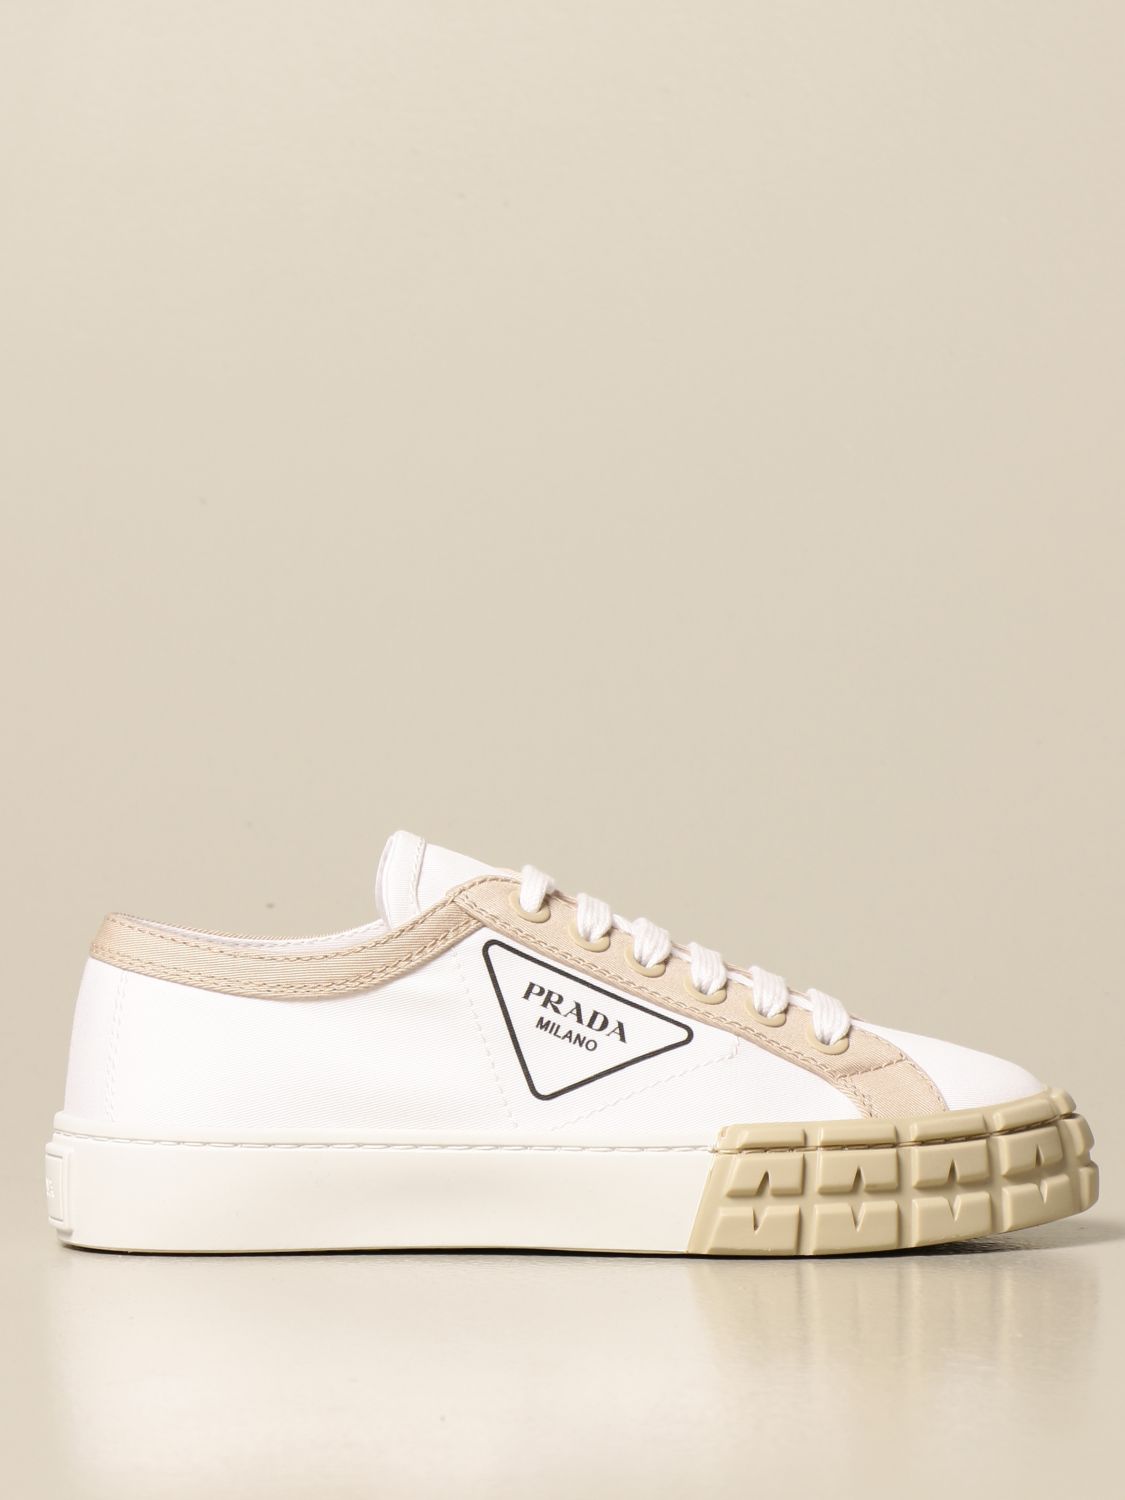 PRADA: sneakers in cotton canvas and leather - White | Prada sneakers  1E939L 89C online on 